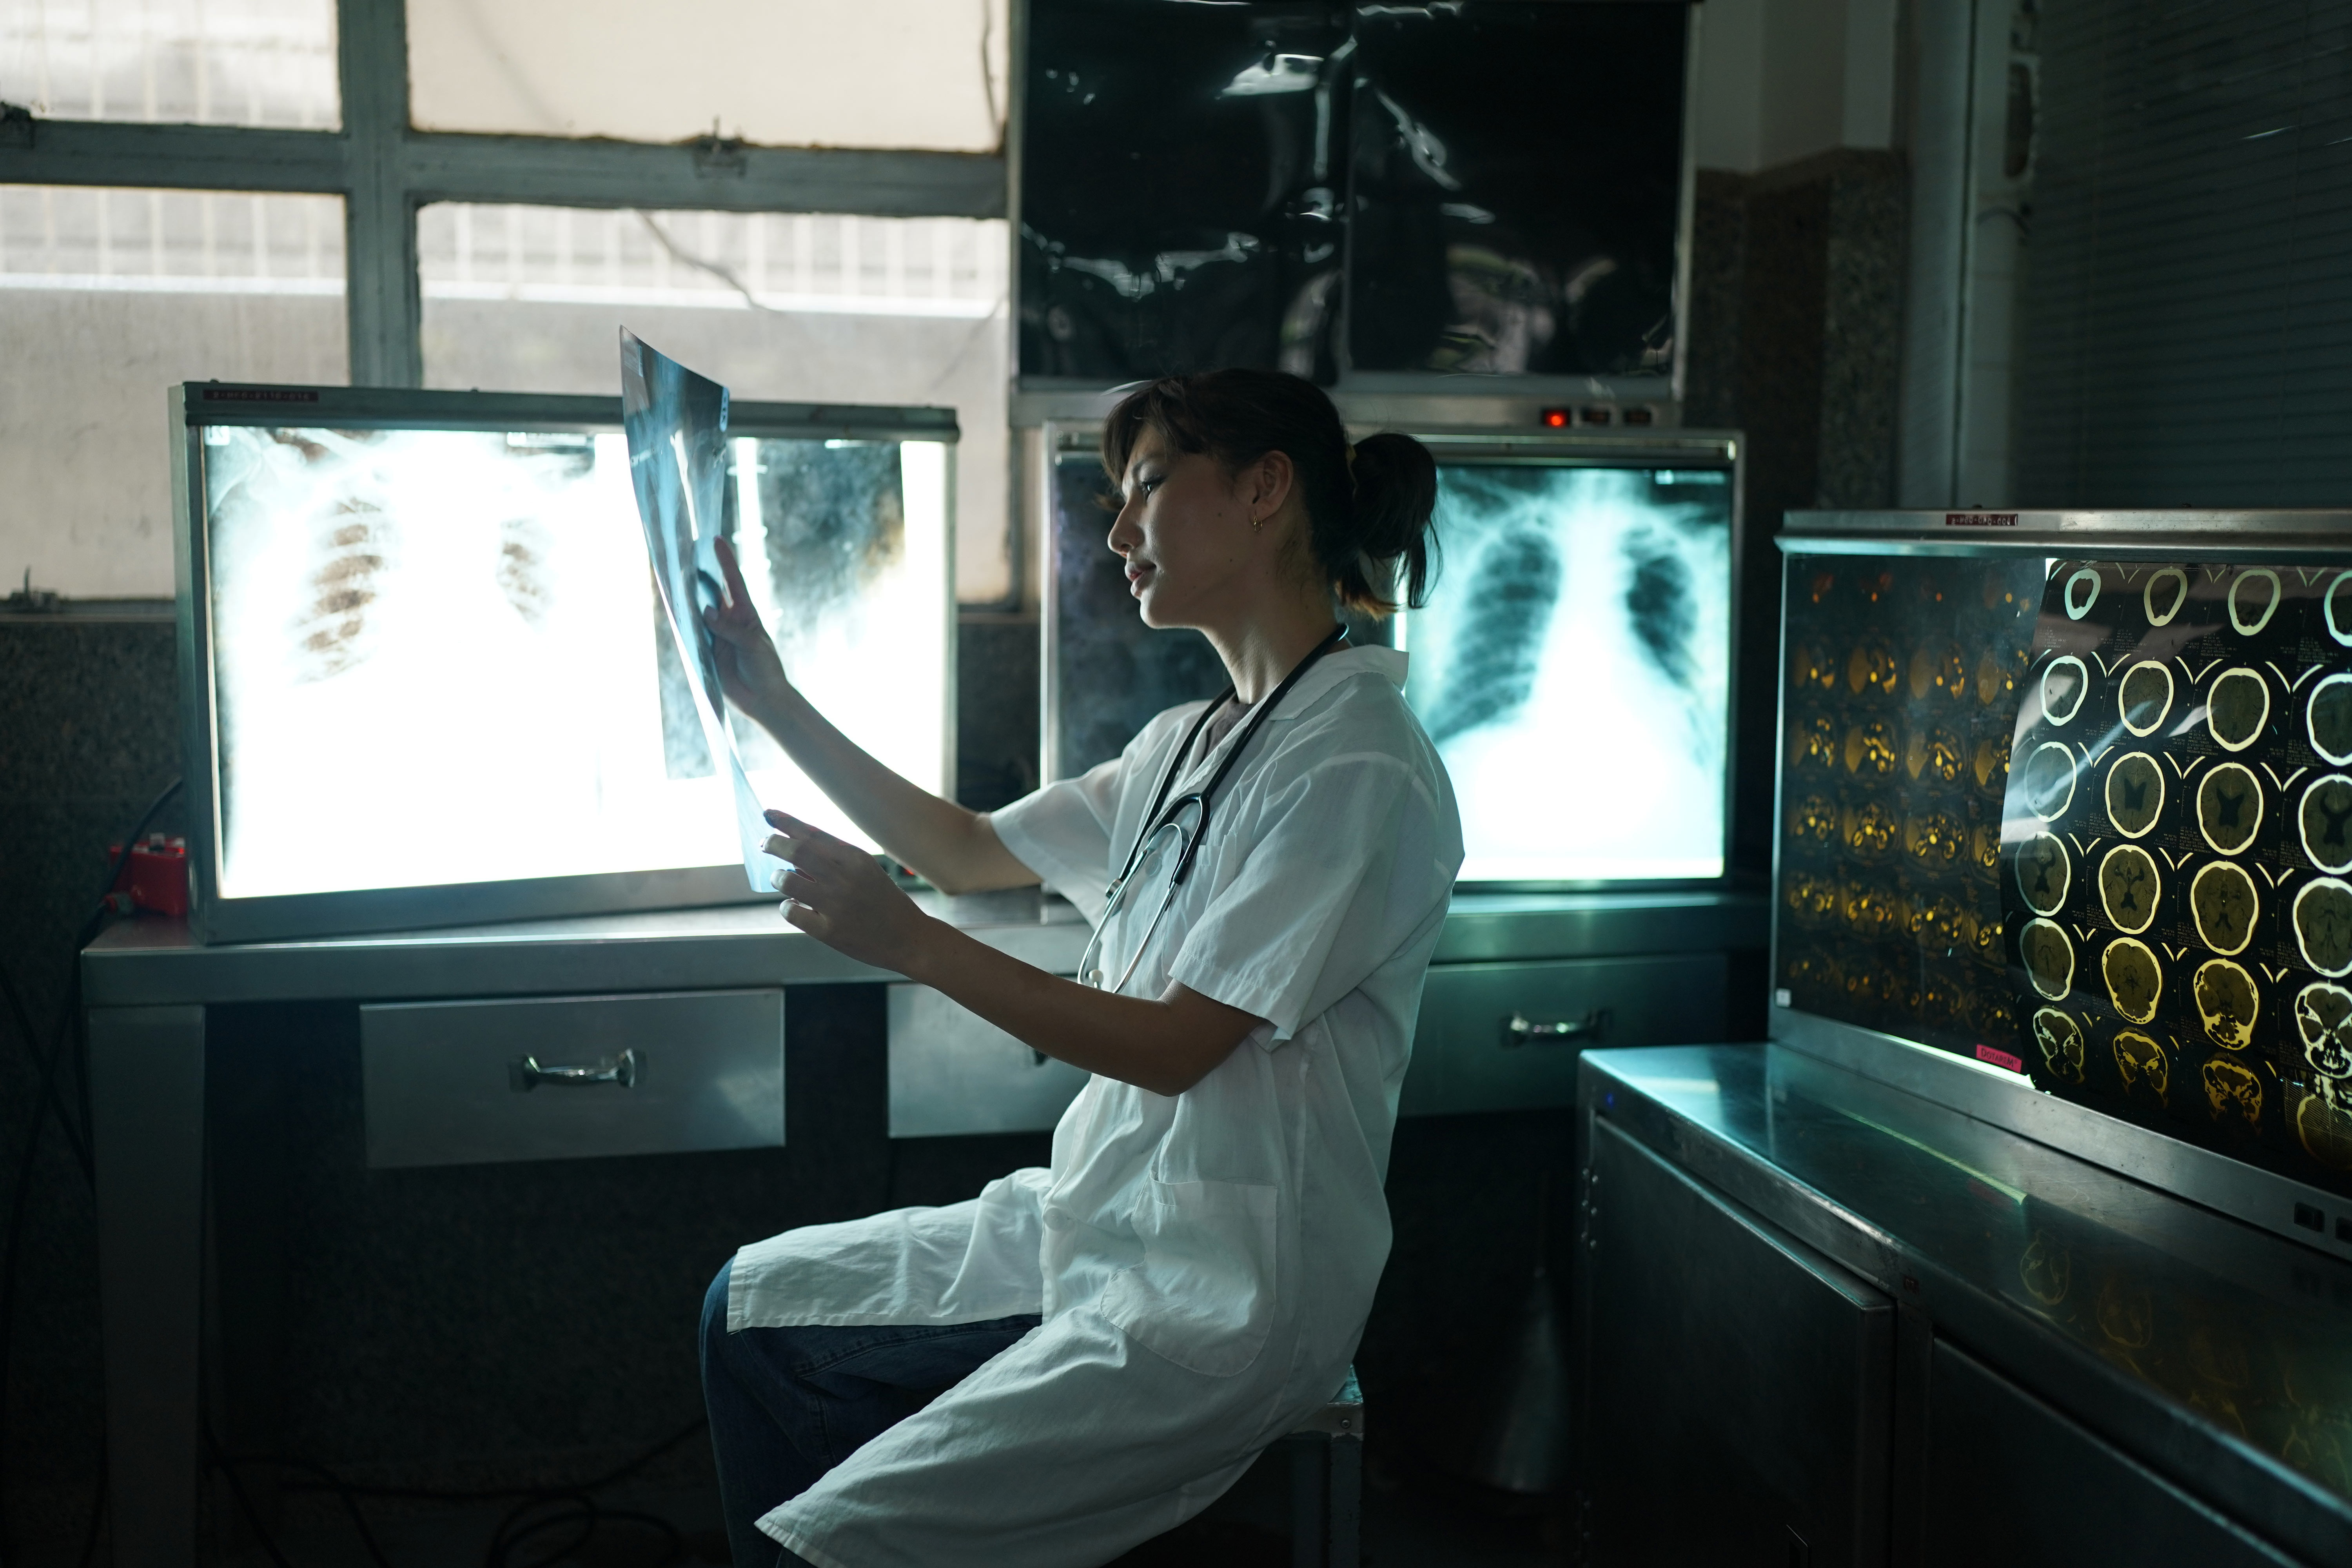 A medical professional looking at x-ray pictures